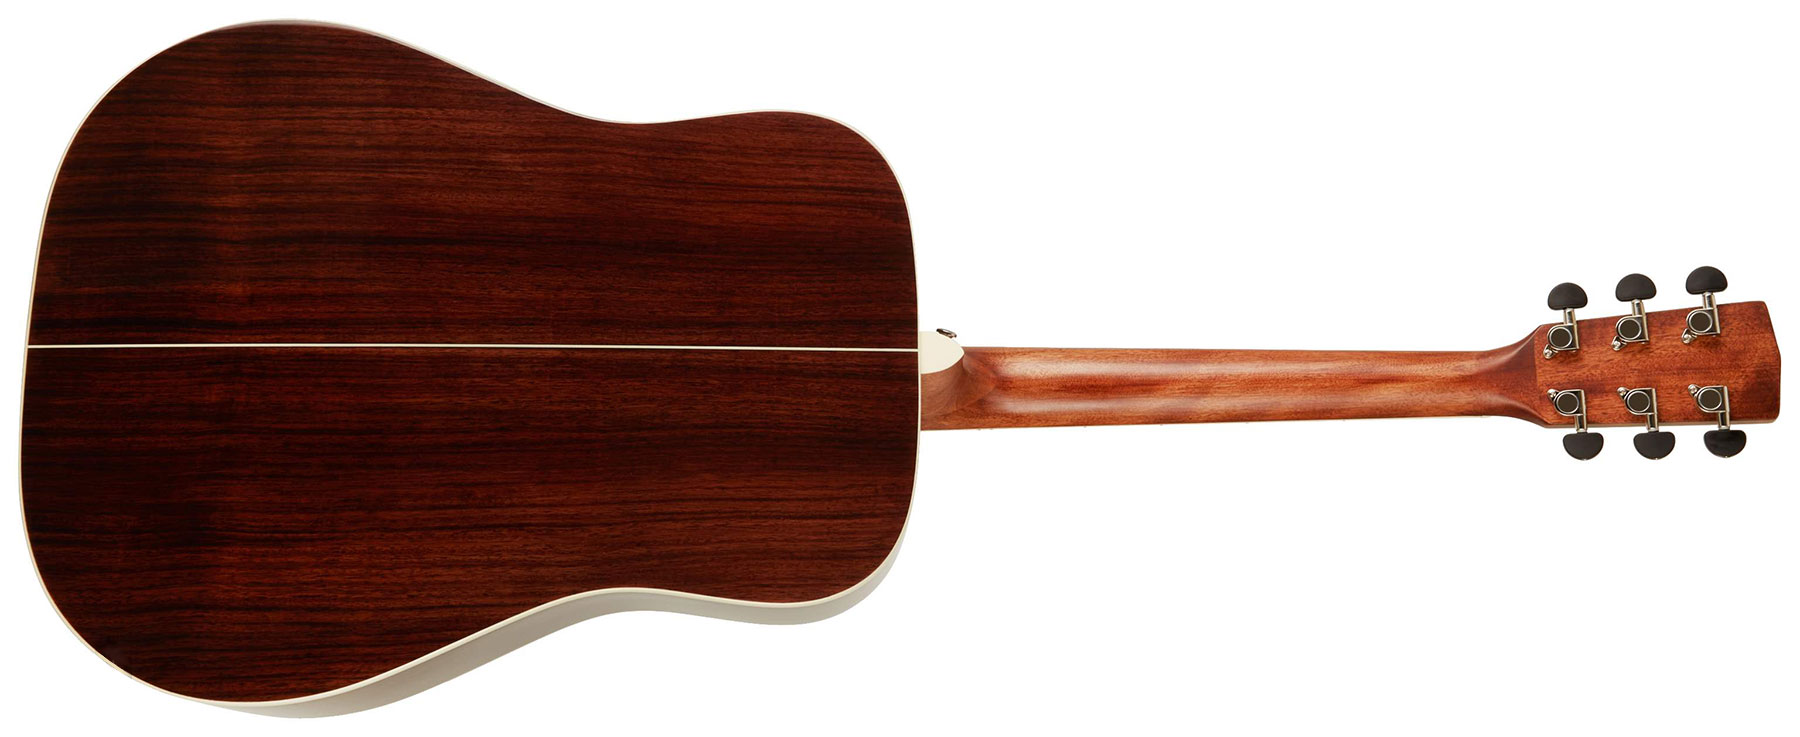 Cort Earth 100 Rosewood Dreadnought Epicea Palissandre Ova - Natural Glossy - Acoustic guitar & electro - Variation 1